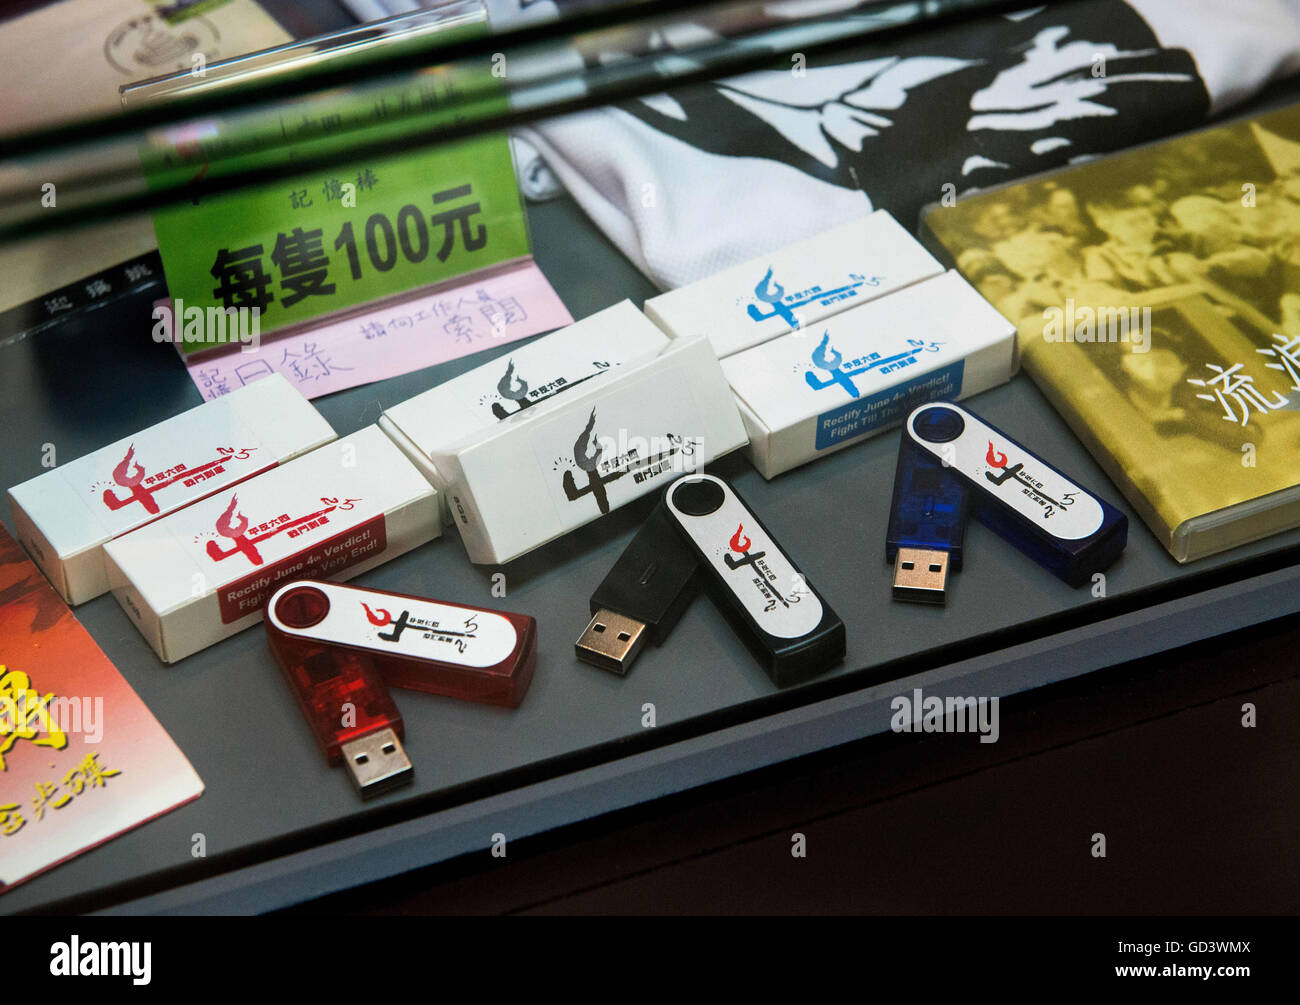 Hong Kong, Hong Kong. 31st May, 2014. USB's on sale to spread the word amongst friends.China's only museum commemorating the 1989 crackdown on protesters in Beijing's Tiananmen Square closes temporarily after a long-running legal battle with the management and owners of the building in which it is housed.Those responsible for the museum are keen to find new premises in their fight to inform a new generation of an event absent from China's school history lessons.June 4th Museum 64Museum.Tiananmen Square protest museum 1989. © Jayne Russell/ZUMA Wire/Alamy Live News Stock Photo